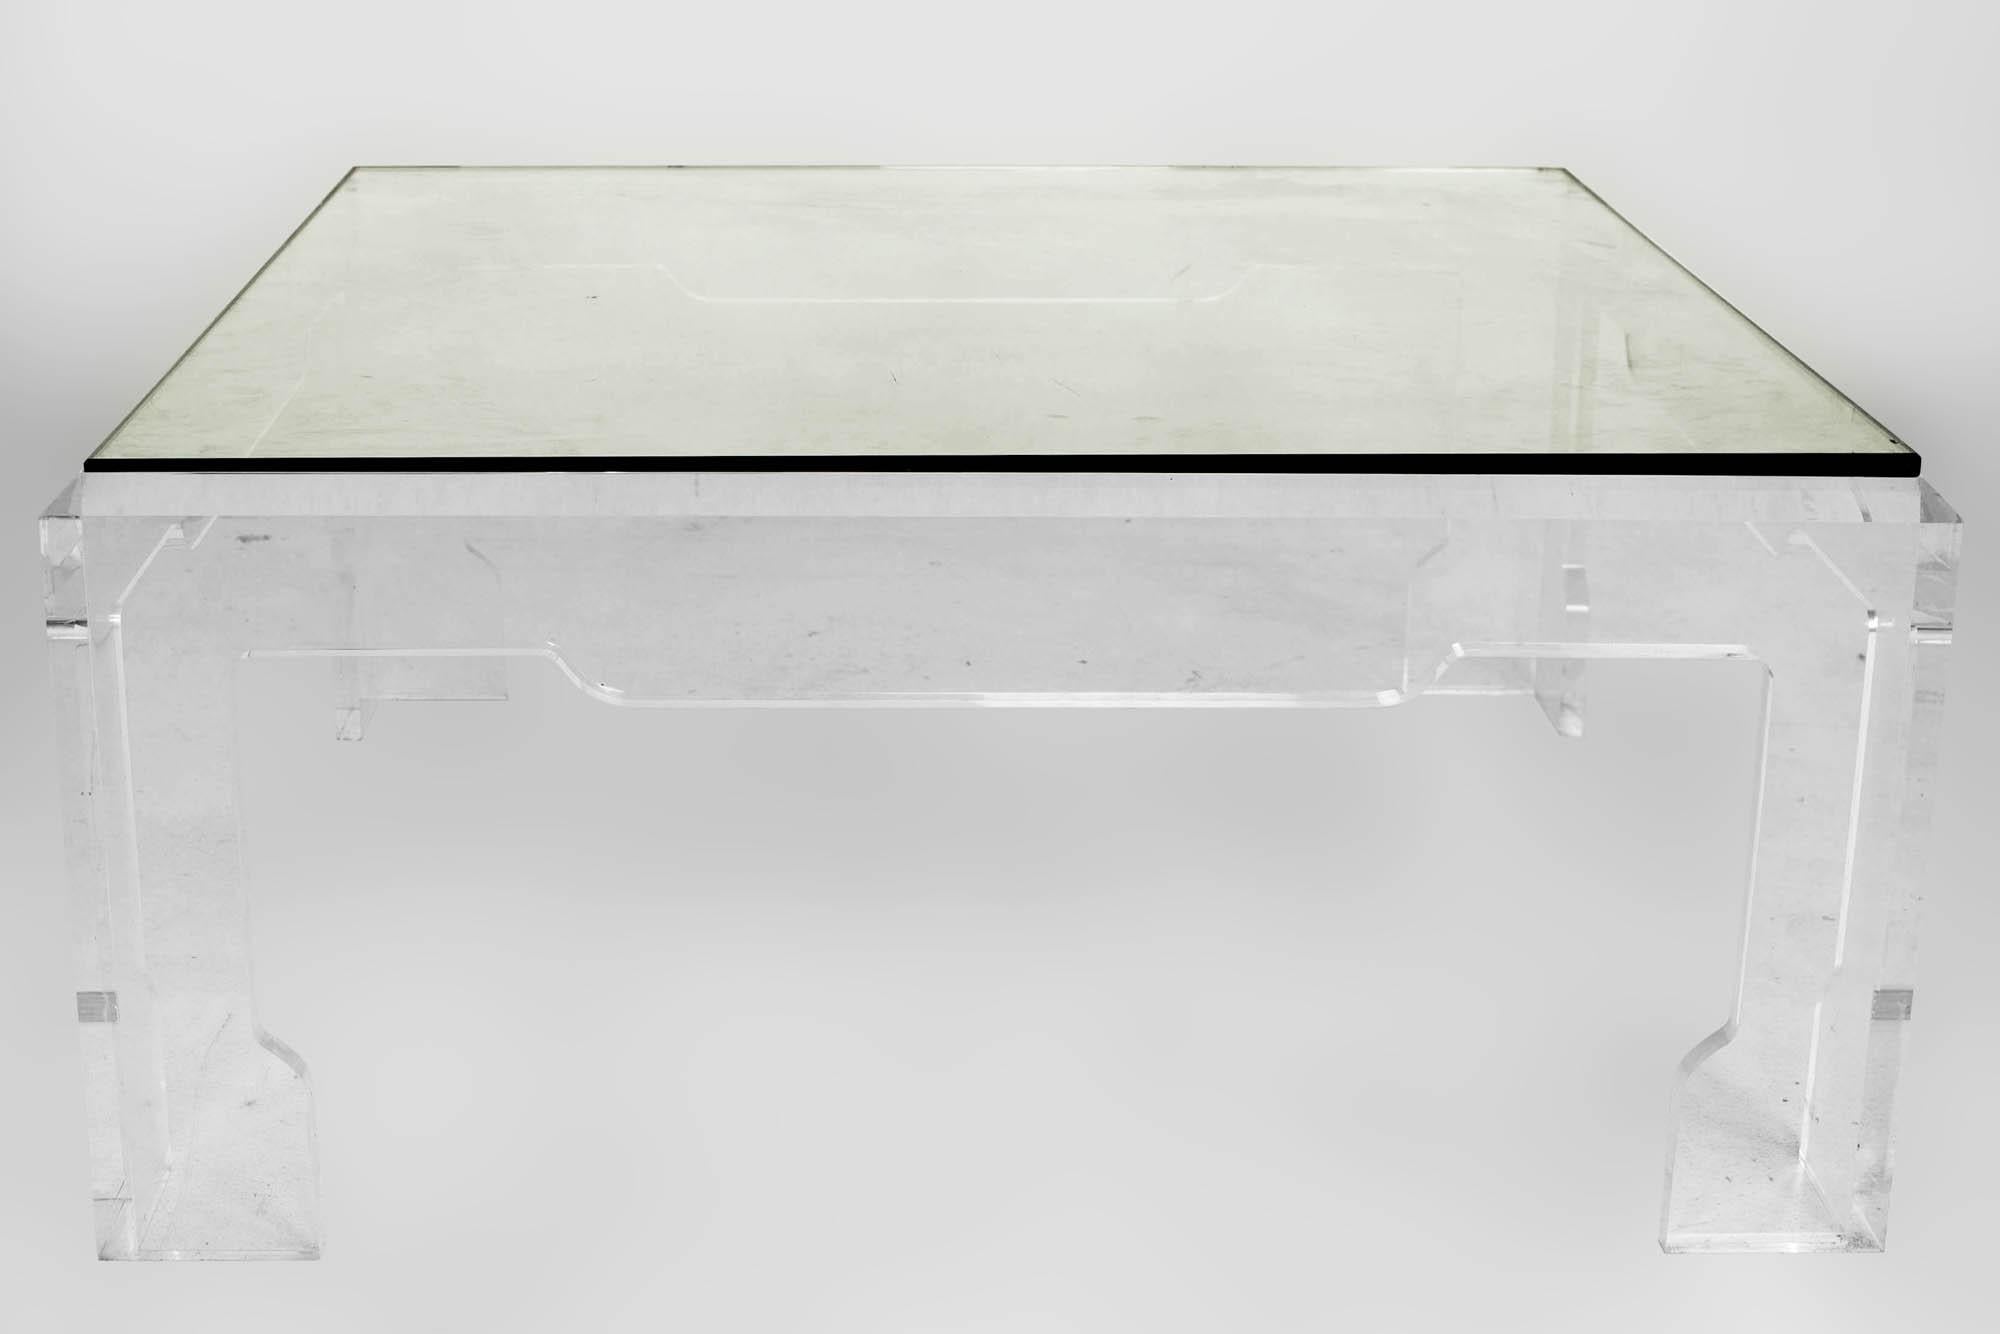 Charles Hollis Jones style mid century square lucite coffee table

Table measures: 34.5 wide x 34.5 deep x 16 inches high

?All pieces of furniture can be had in what we call restored vintage condition. That means the piece is restored upon